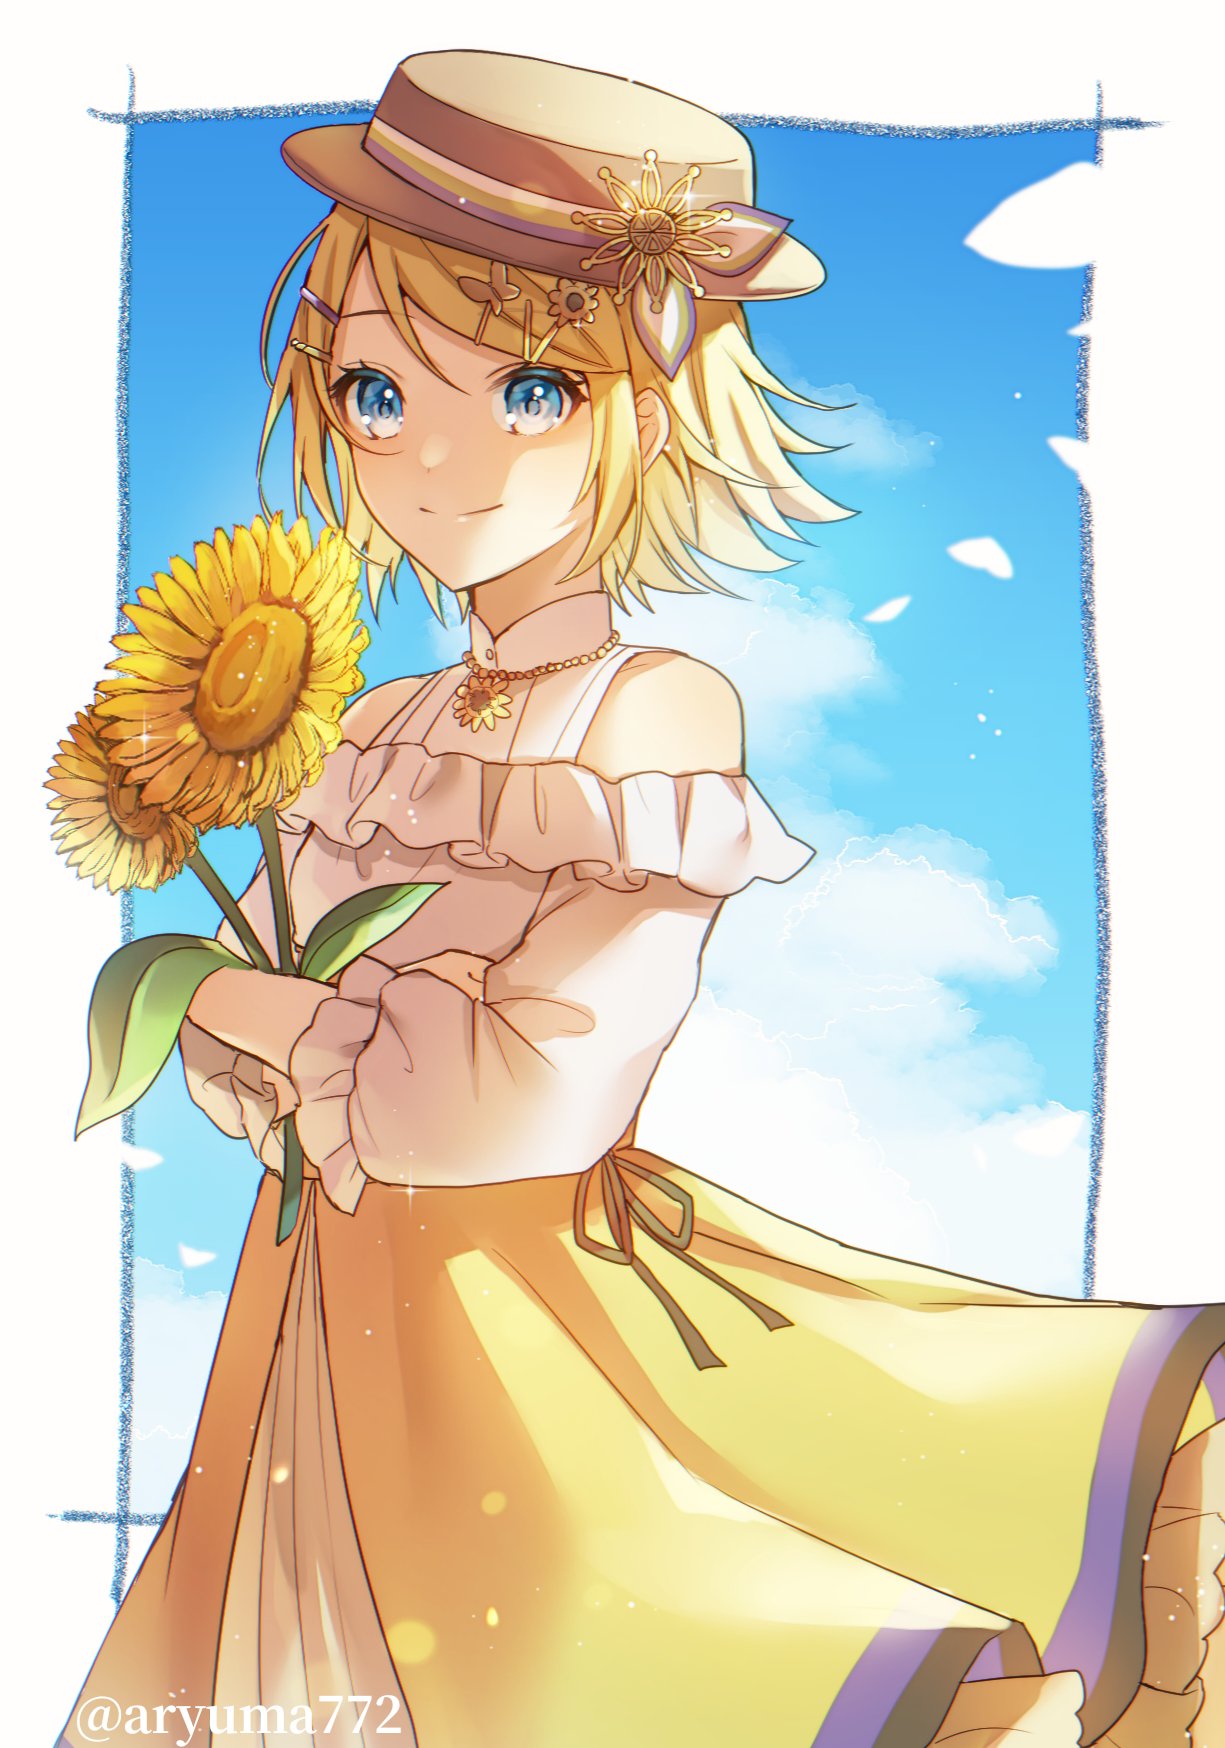 1girl aryuma772 bare_shoulders blouse blue_eyes blue_sky boater_hat crossed_arms flower flower_necklace flower_ornament frilled_shirt frilled_skirt frilled_sleeves frills hair_ornament hairclip hat_ornament highres holding holding_flower kagamine_rin long_skirt looking_at_viewer petticoat project_sekai shirt short_hair skirt sky smile solo sunflower twitter_username vocaloid yellow_skirt